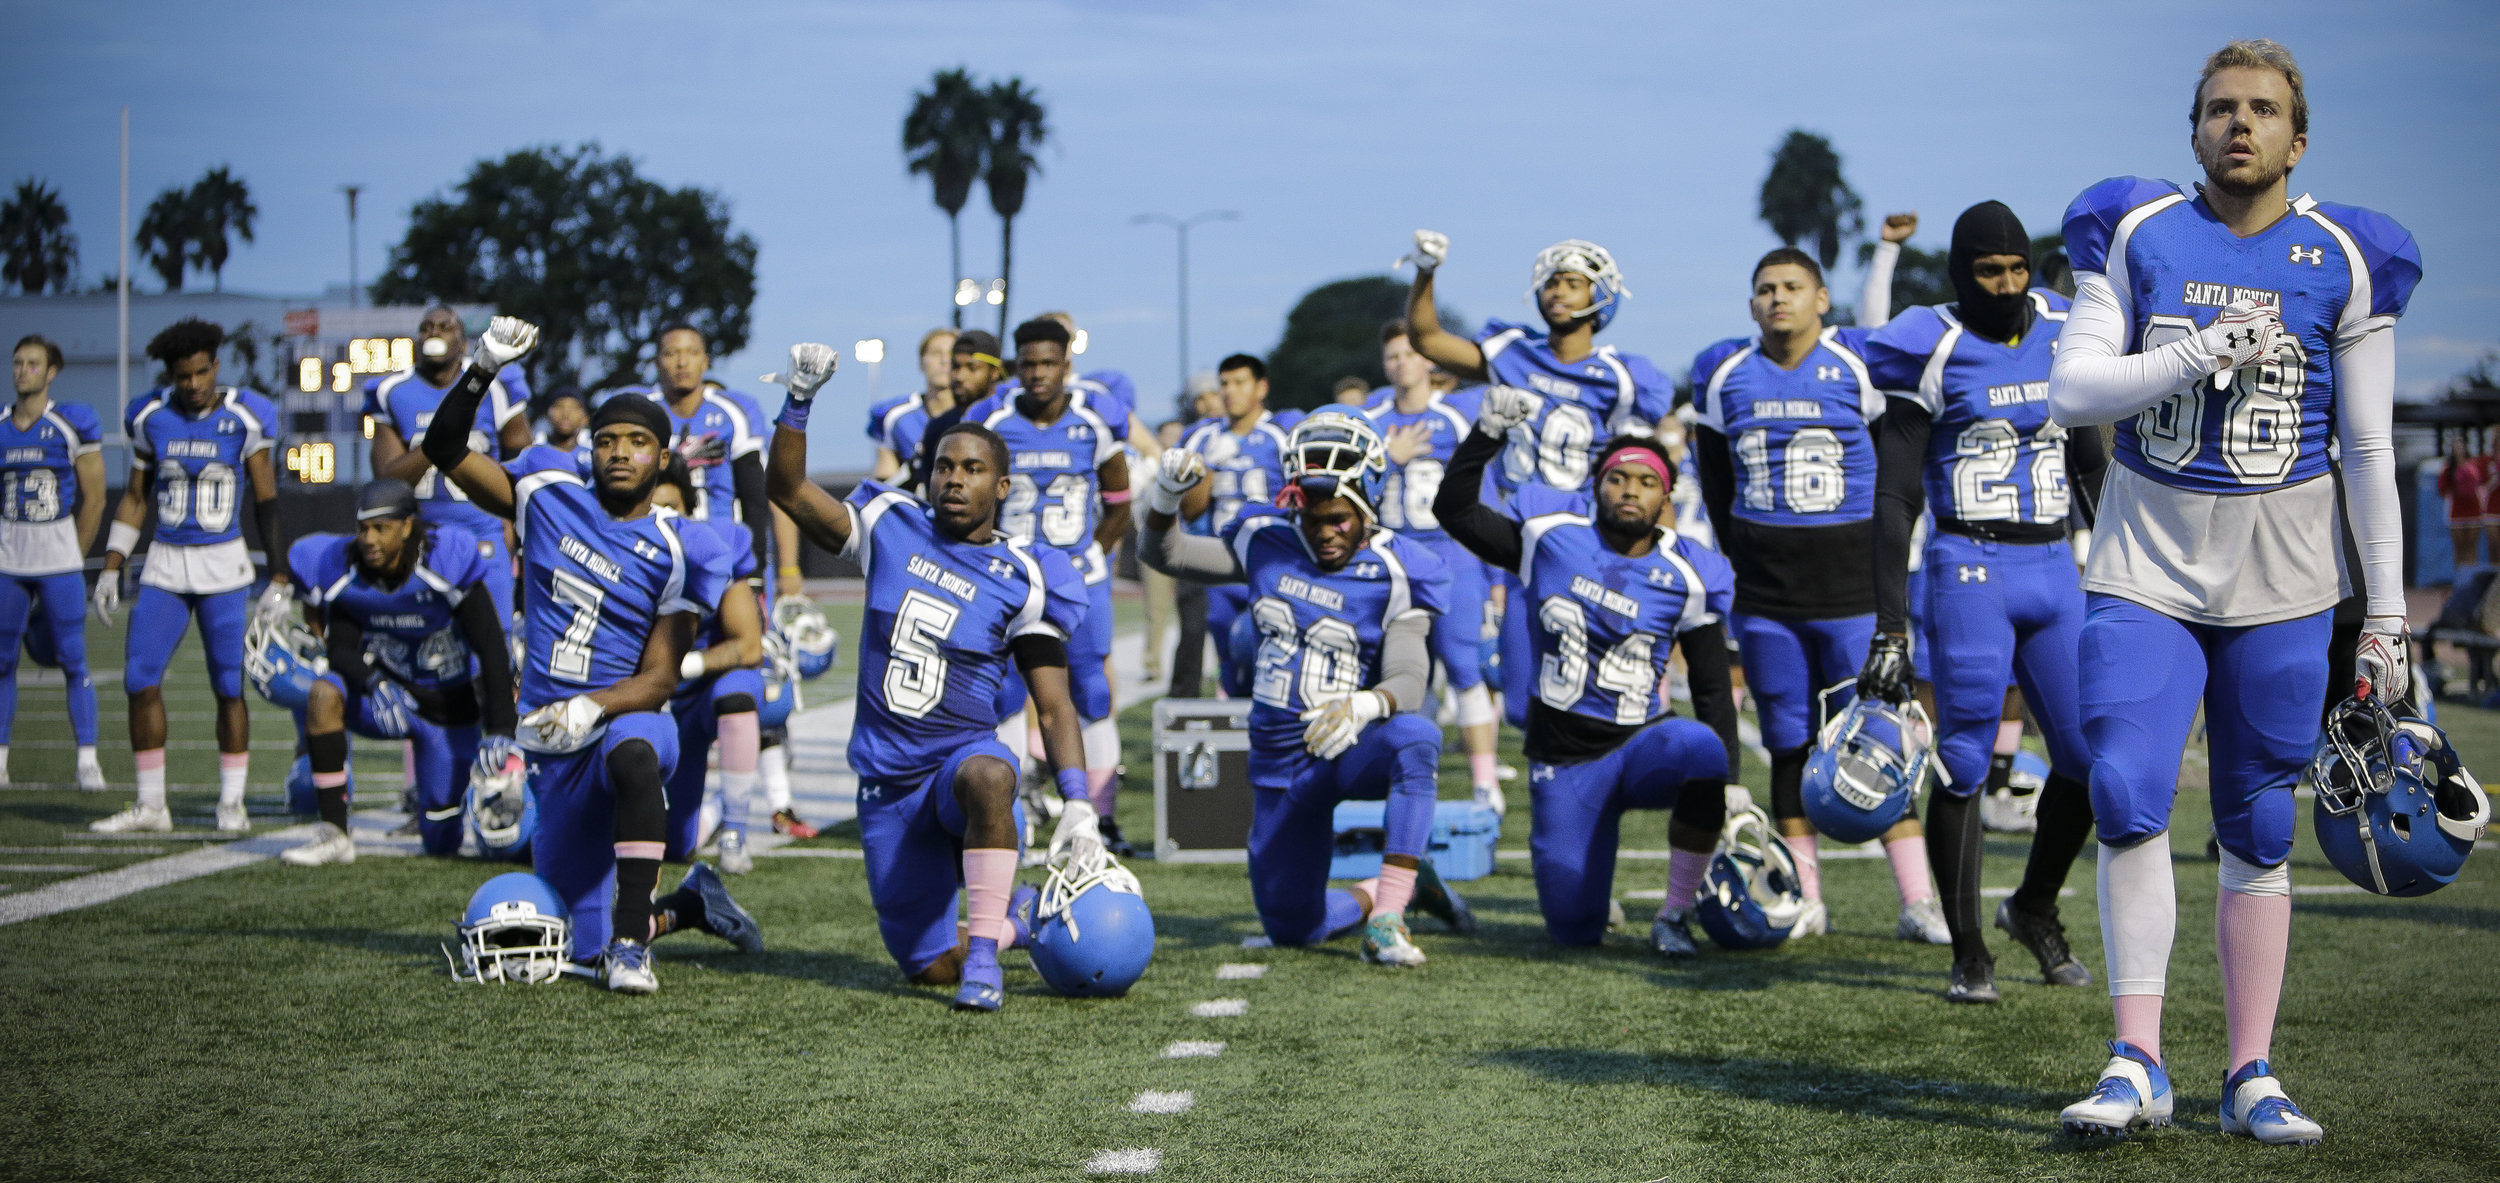  Teamates on The Santa Monica College Corsair mens football team continue to kneel in recognition for #BlackLivesMatter during the National Anthem before the teams Homecoming game. The Corsairs football team would loose at home 26-14 in Santa Monica 